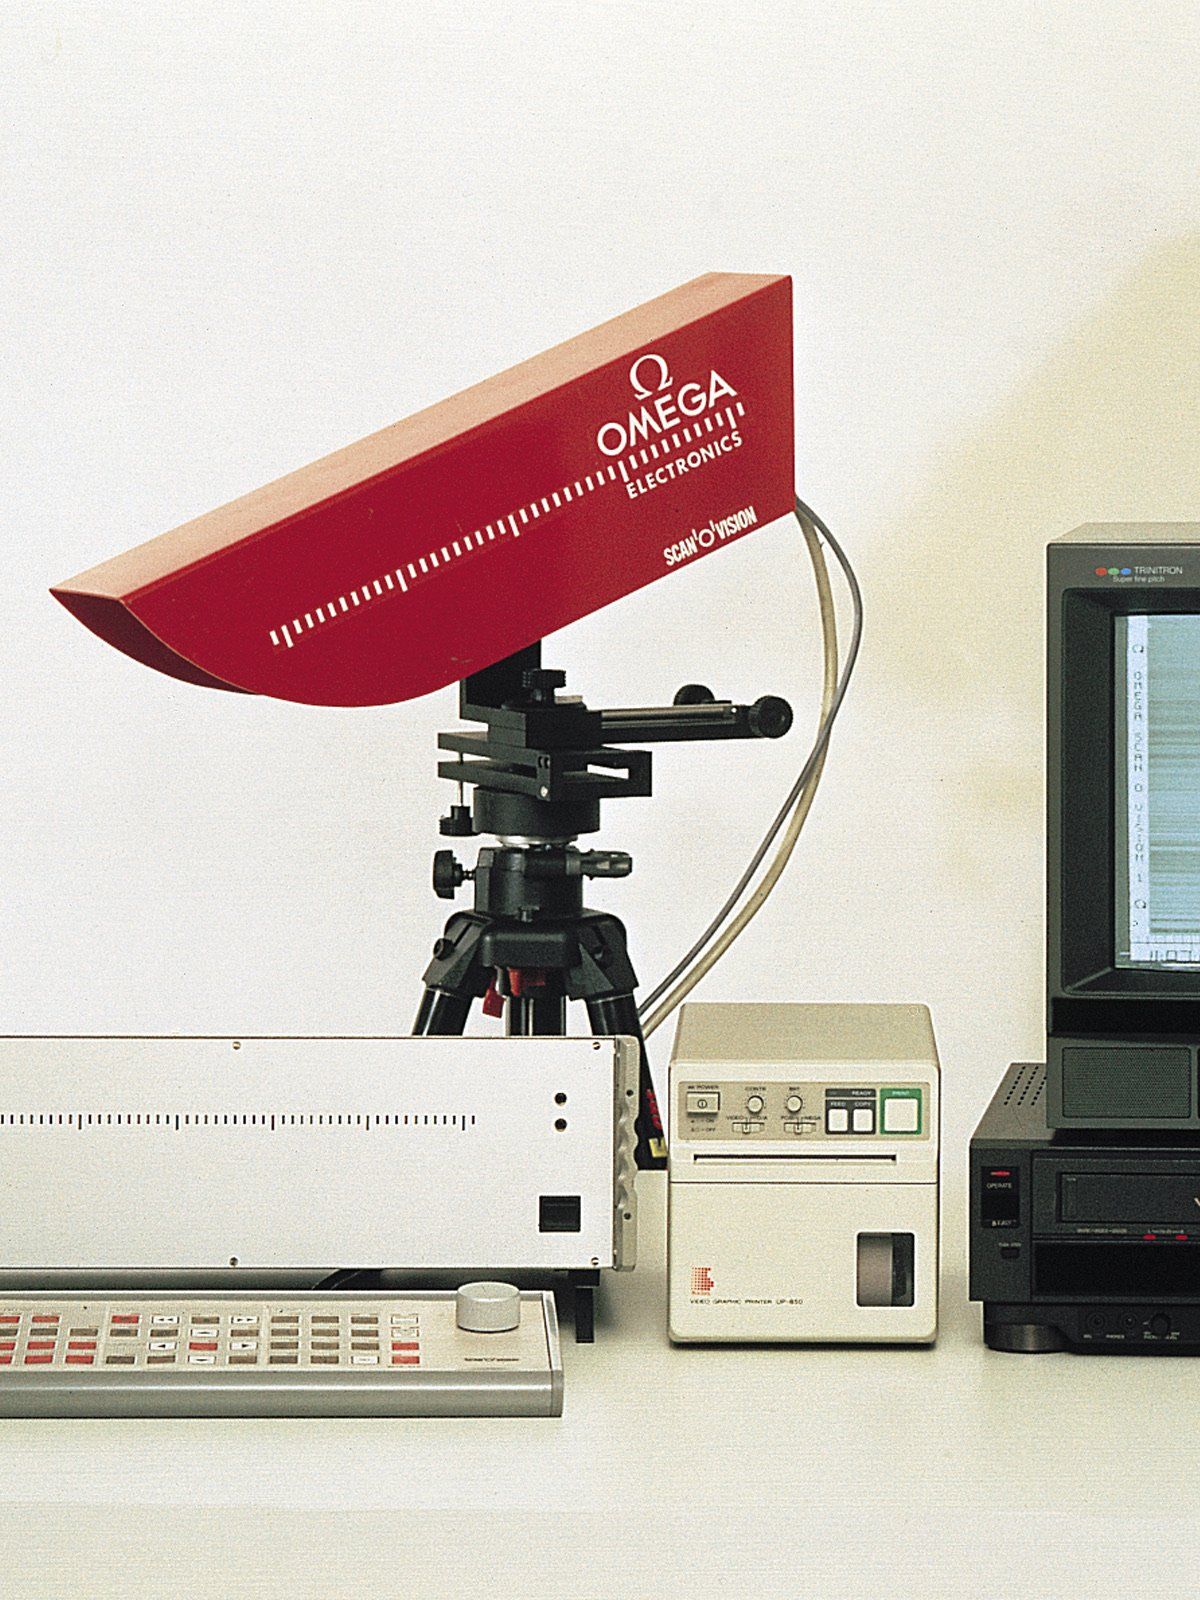 At the 1992 Winter Games in Albertville, Omega introduced its Scan-O-Vision system for speed skating competition that digitally measured times to the nearest thousandth of a second as the skaters crossed the finish line - source, Omega